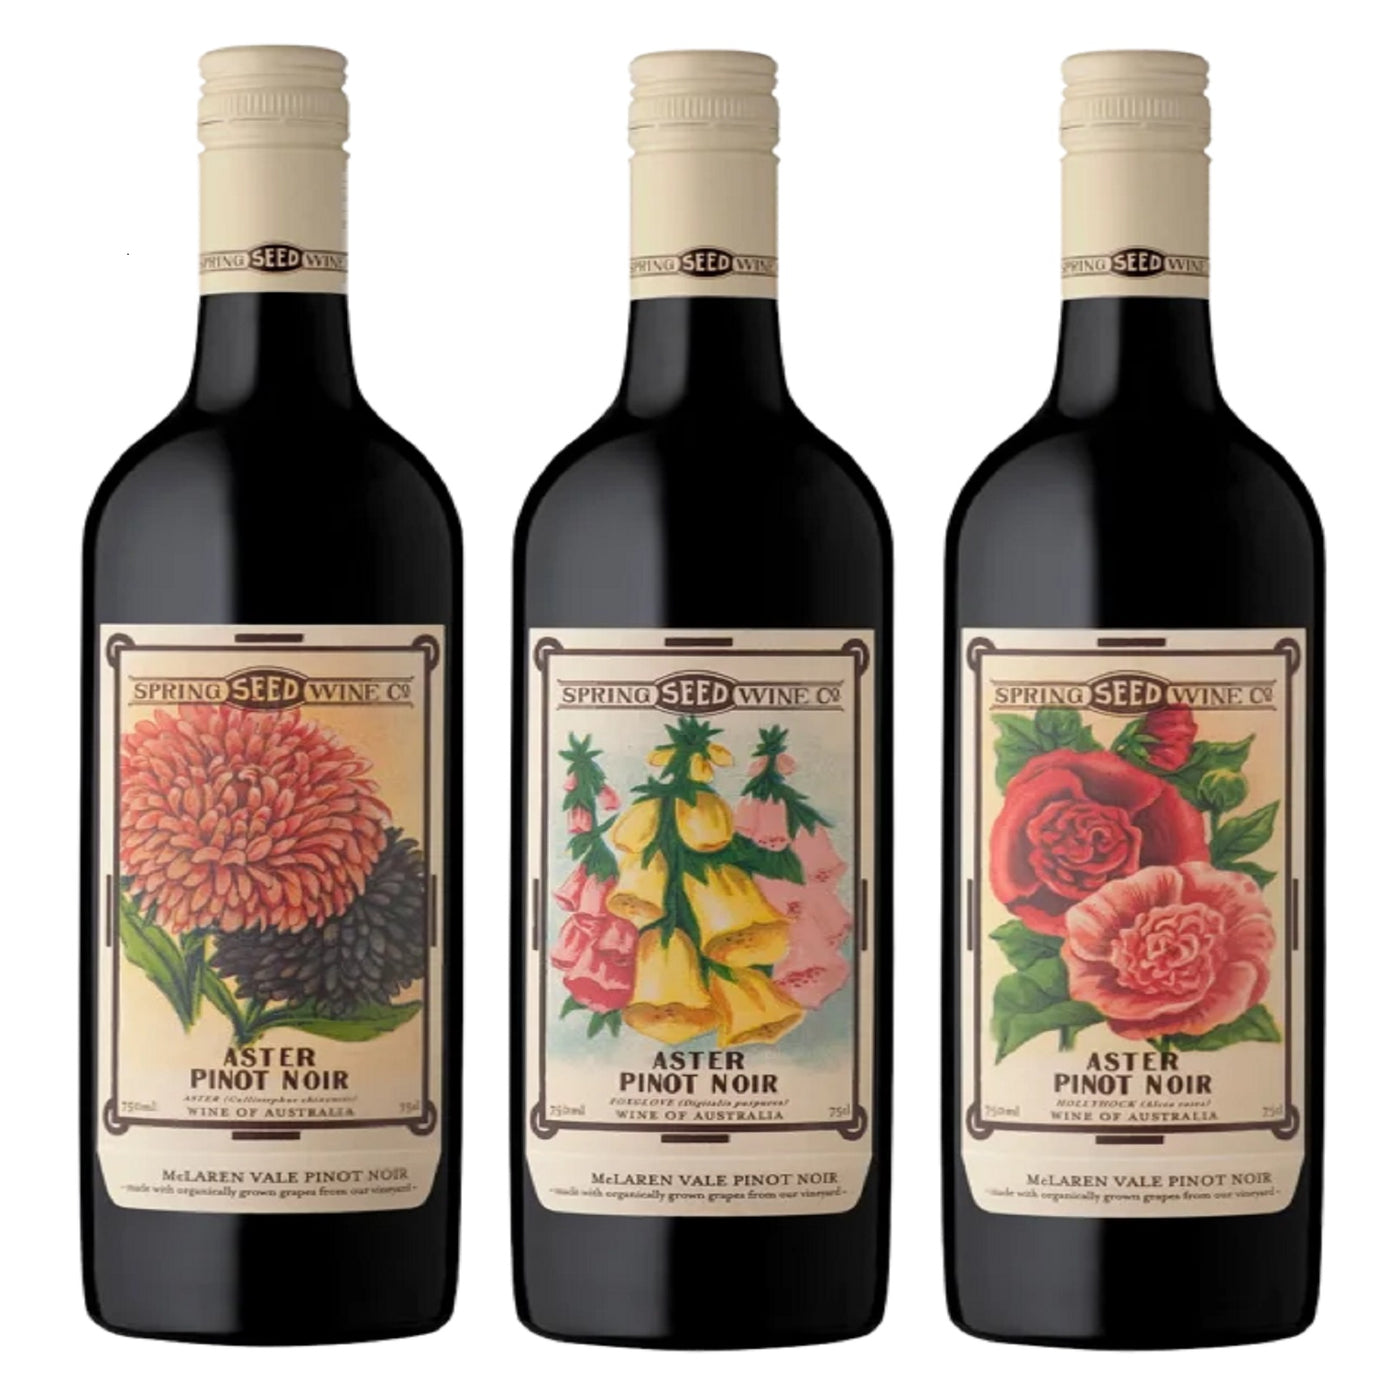 Beija Flor Spring Seed Wine Aster Pinot Noir in Different Floral Highlight